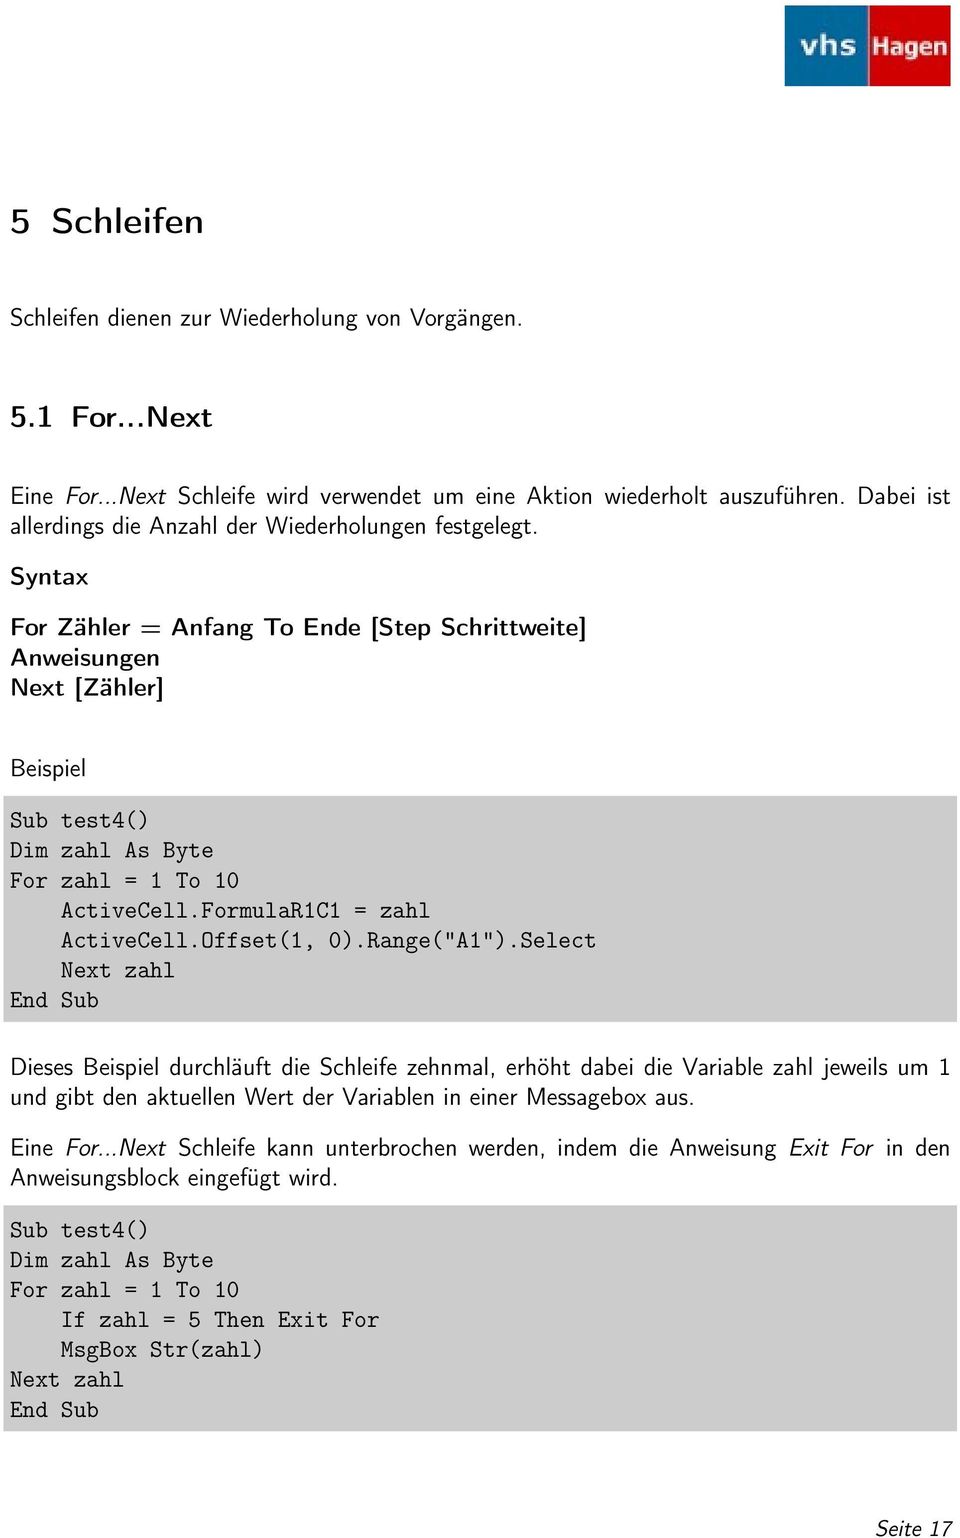 Syntax For Zähler = Anfang To Ende [Step Schrittweite] Anweisungen Next [Zähler] Beispiel Sub test4() Dim zahl As Byte For zahl = 1 To 10 ActiveCell.FormulaR1C1 = zahl ActiveCell.Offset(1, 0).